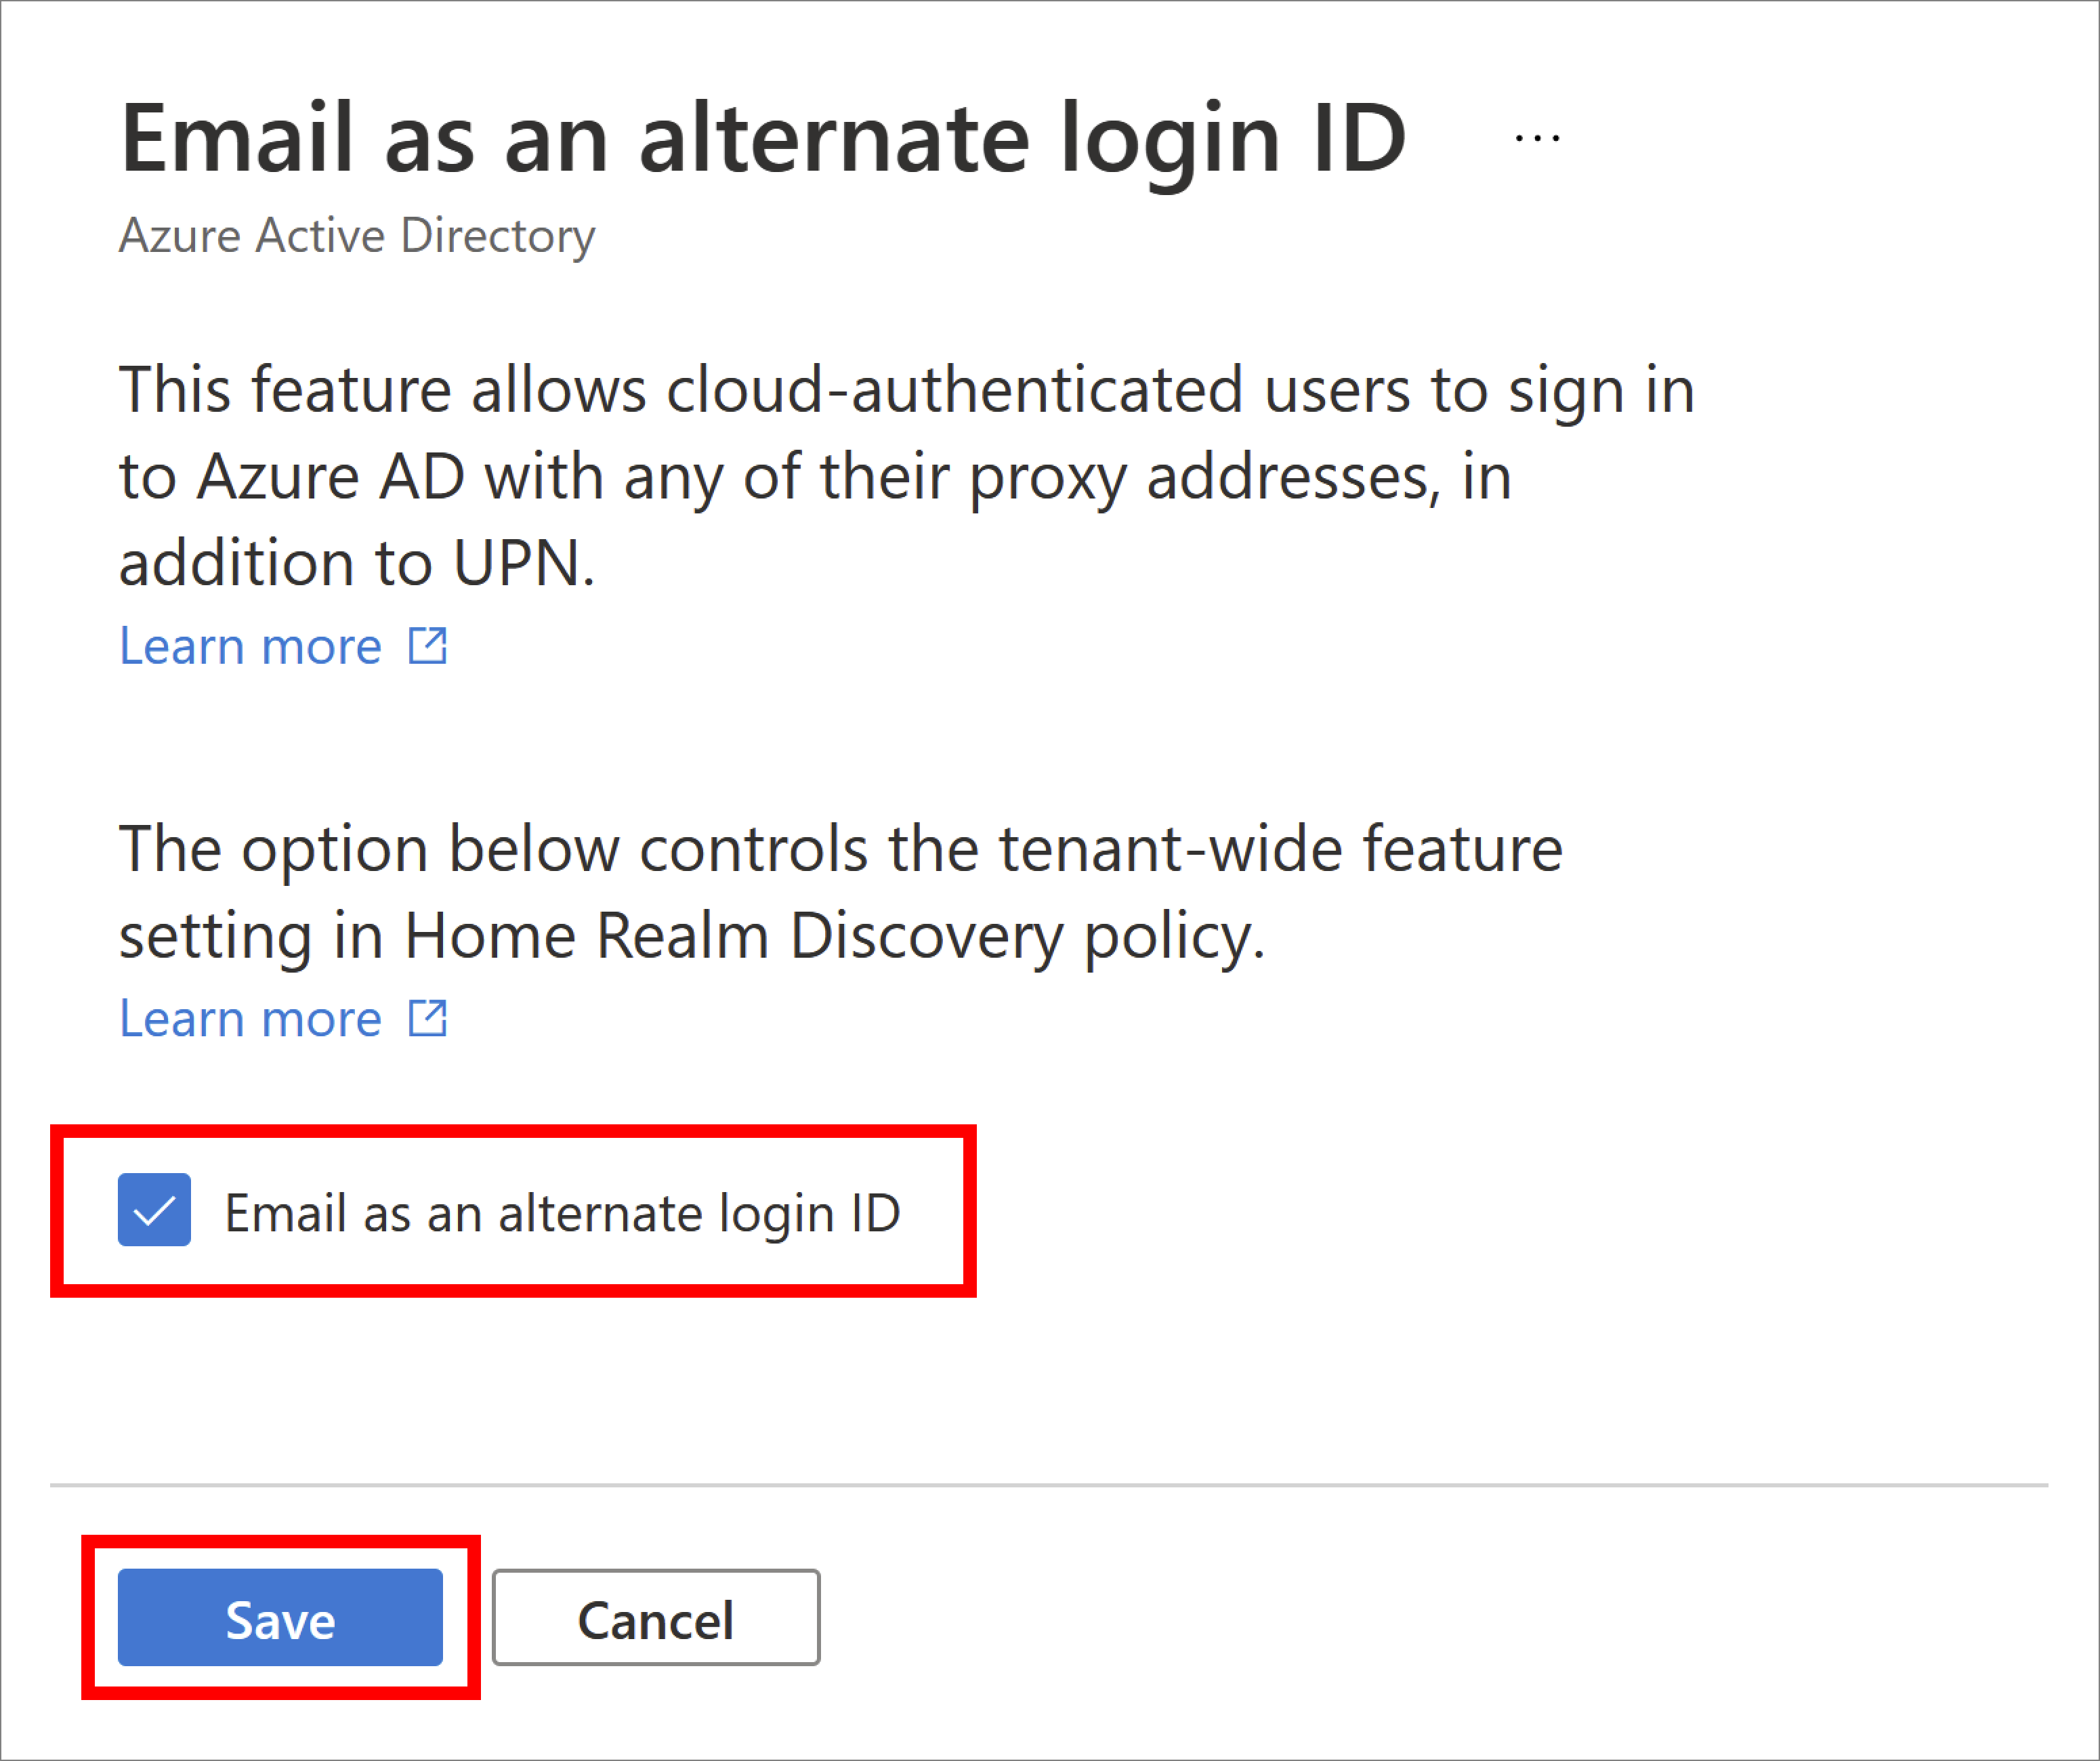 Screenshot of email as alternate login ID blade in the Microsoft Entra admin center.